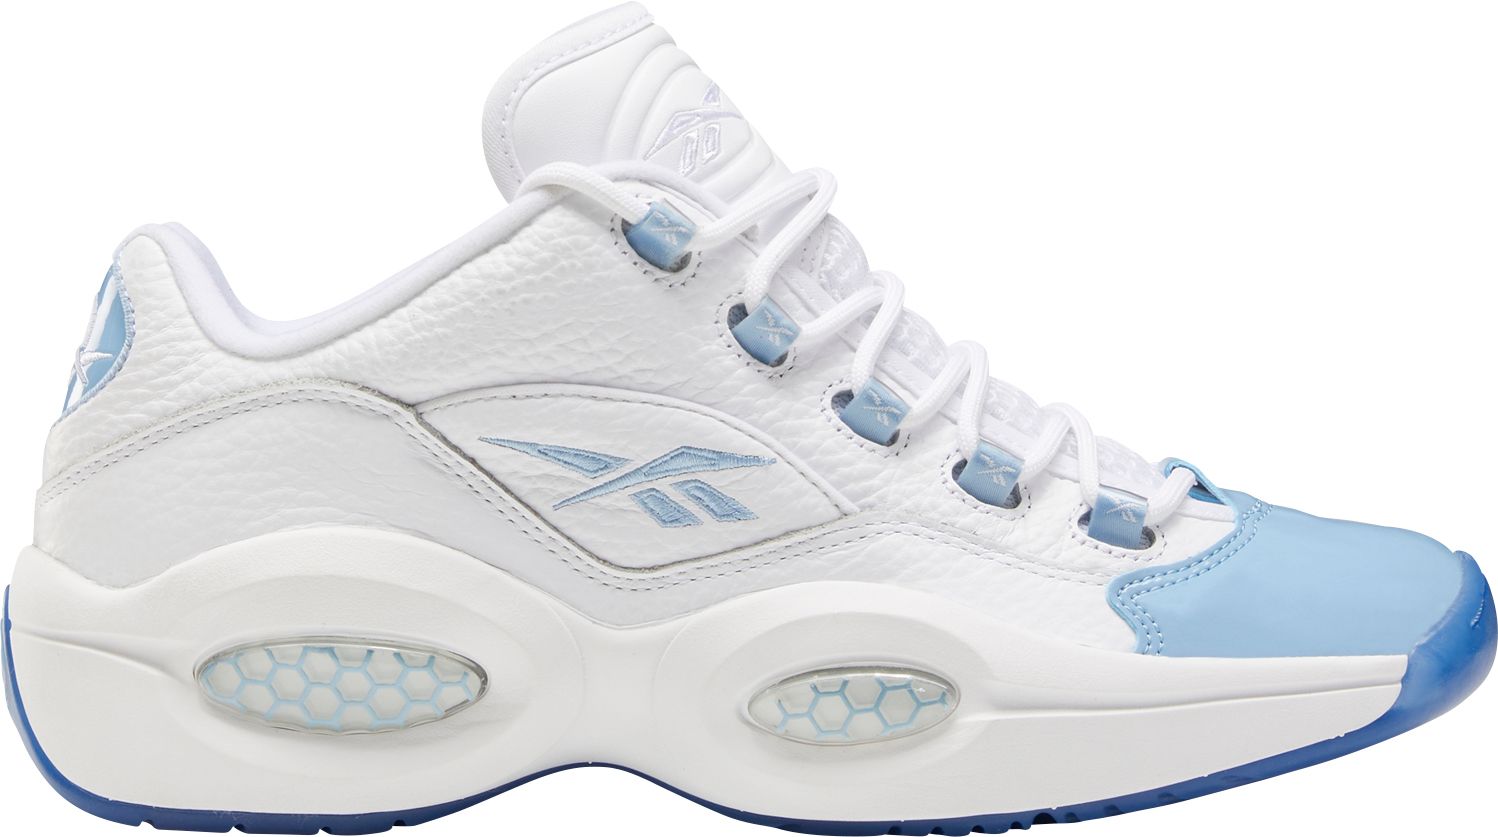 the reebok question